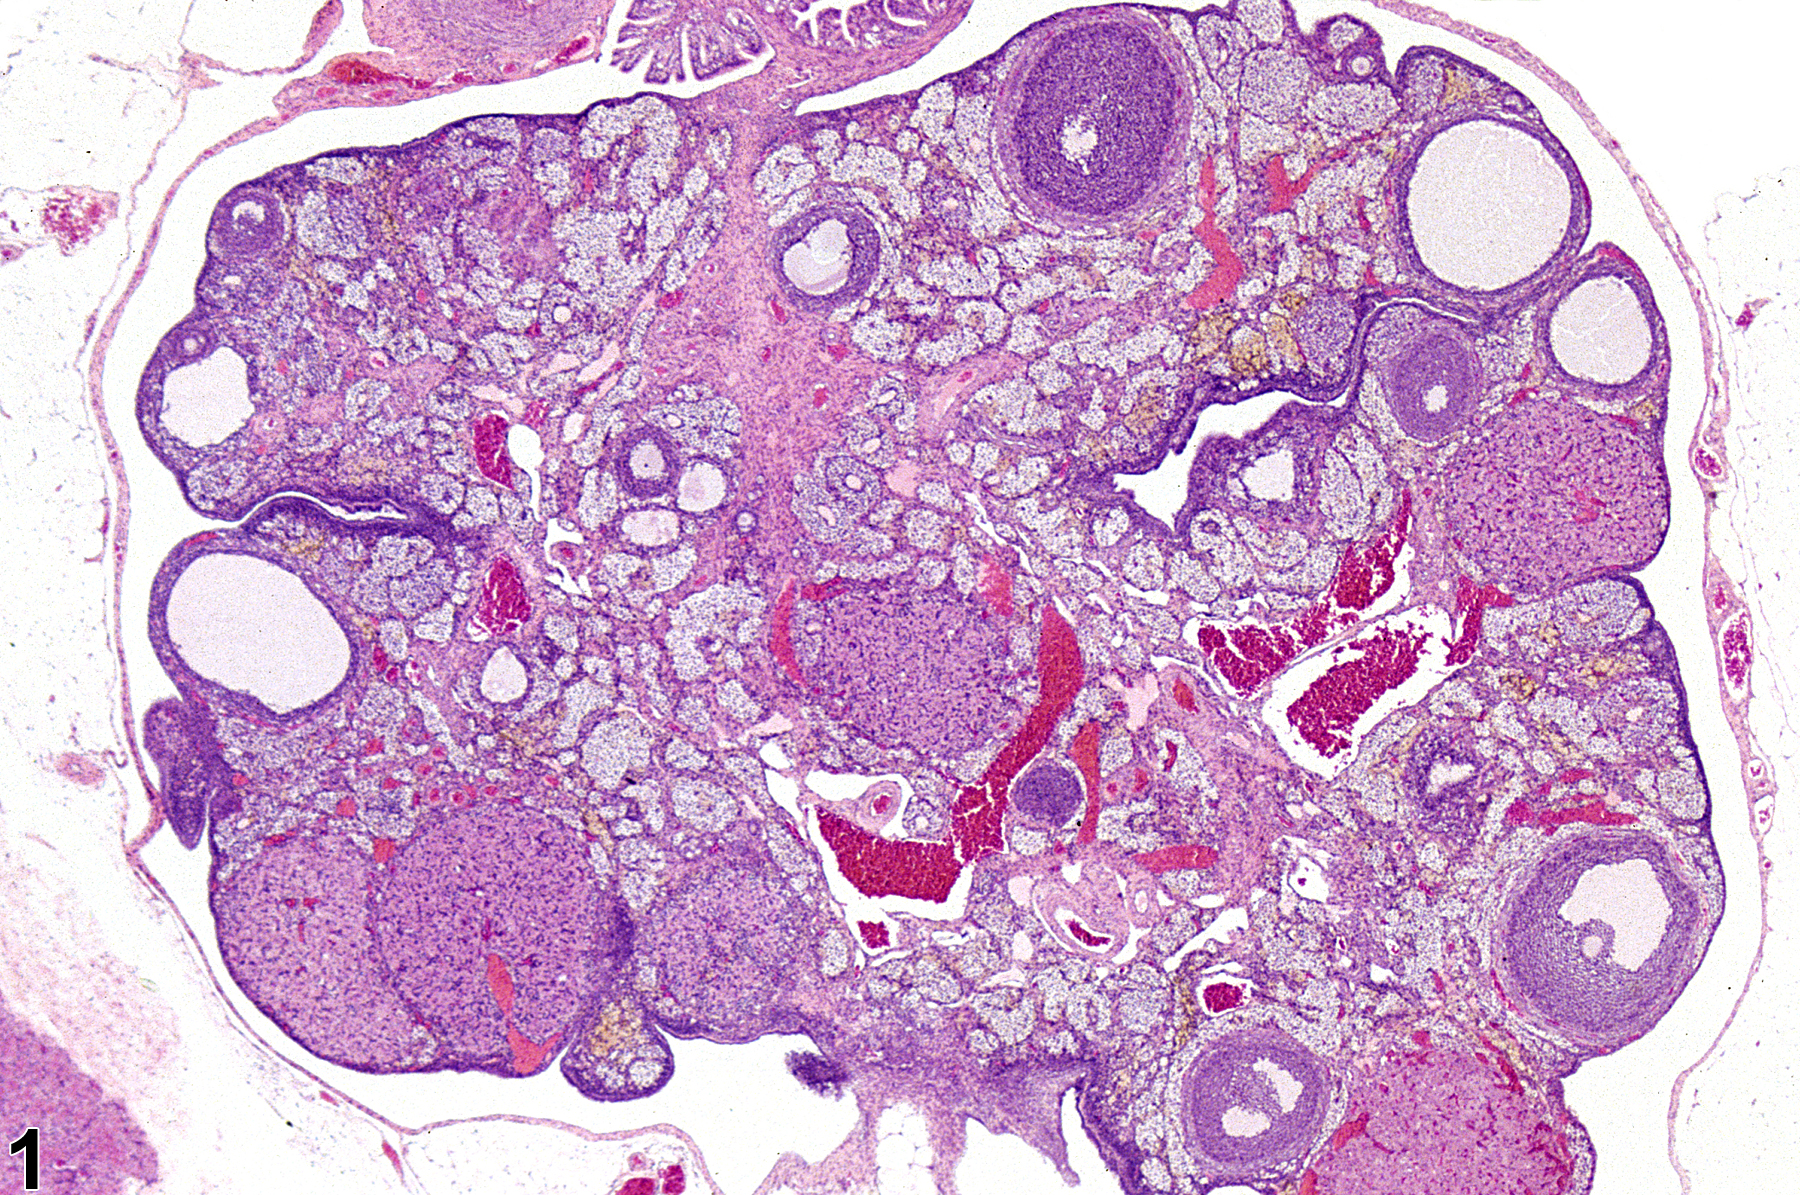 Image of interstitial cell hyperplasia in the ovary from a female F344/N rat in a subchronic study